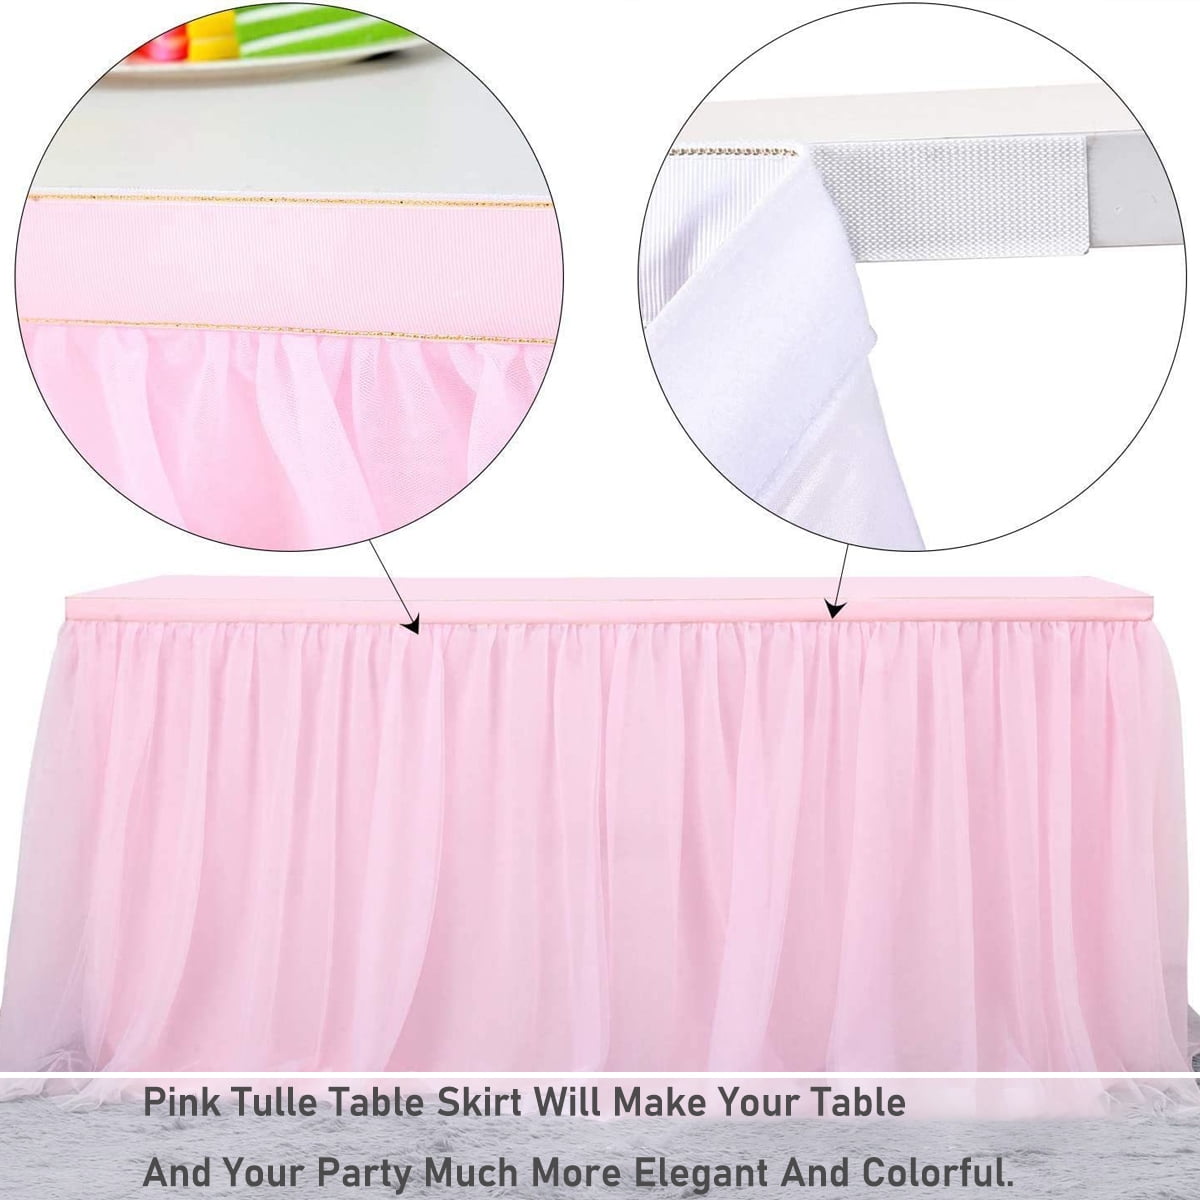 IFCOW Tulle Table Skirt for Round or Rectangle Tables Dessert Tutu ...